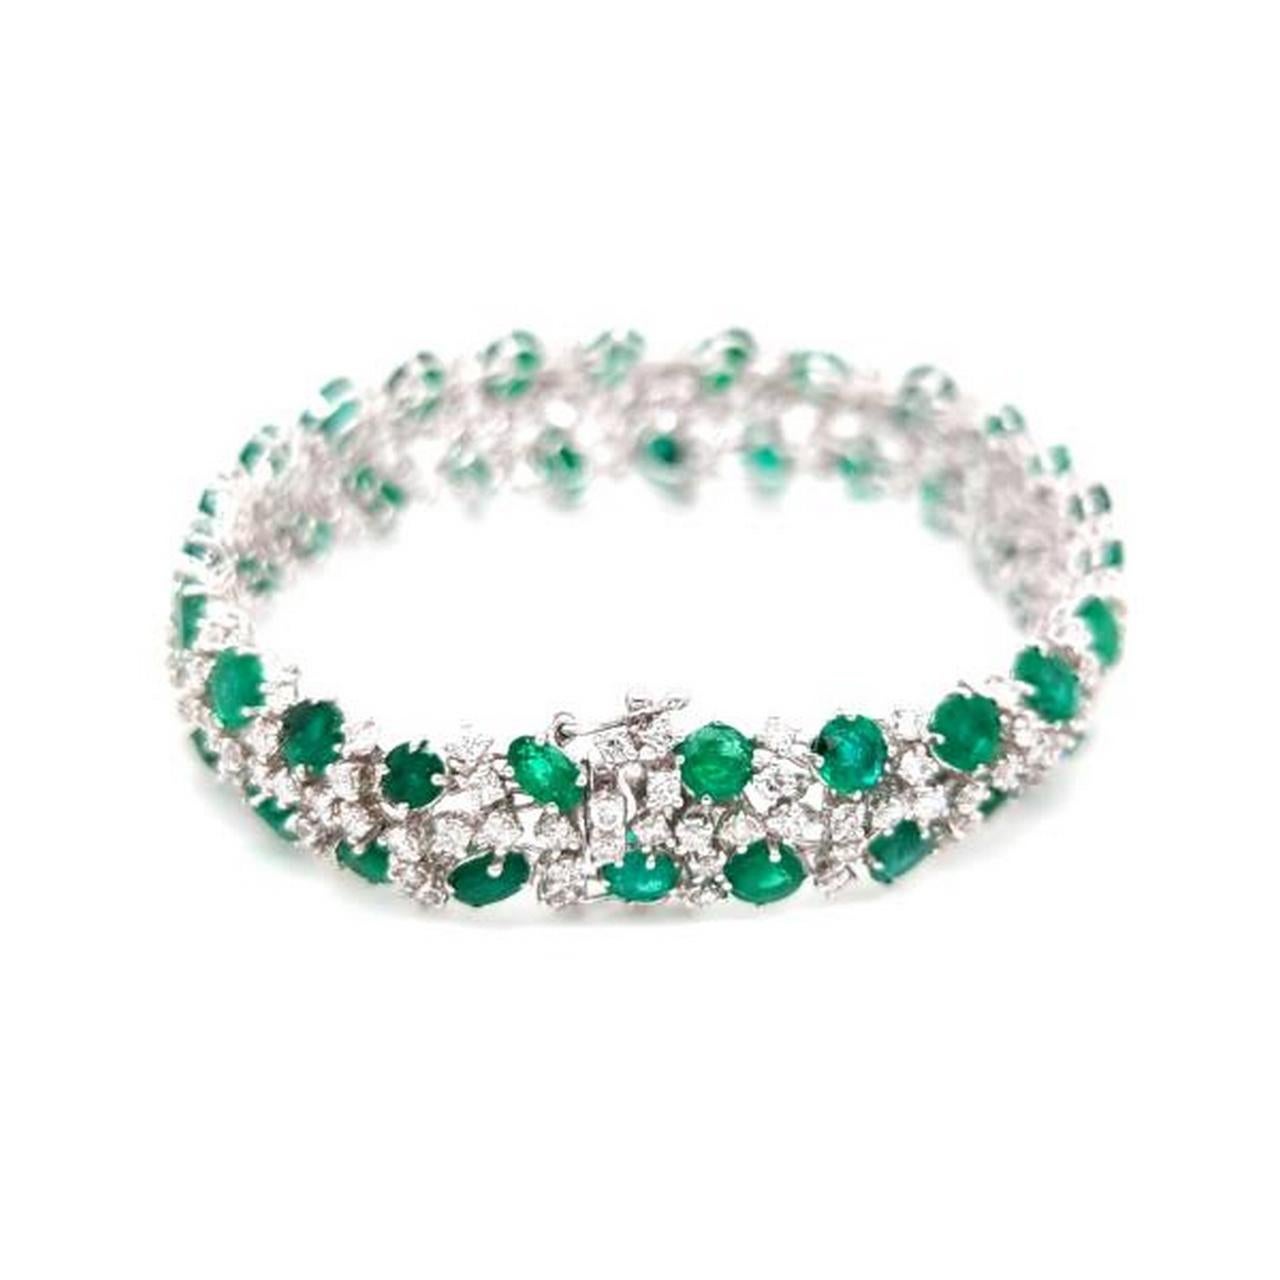 The Following Item we are offering is a Rare 18KT Gold Emerald and Diamond Bracelet. Bracelet is comprised of Finely Set Gorgeous Glittering Fancy Shaped Emeralds and Diamonds!!! T.C.W. Approx 28CTS!! The Emeralds and Diamonds are of Exquisite and